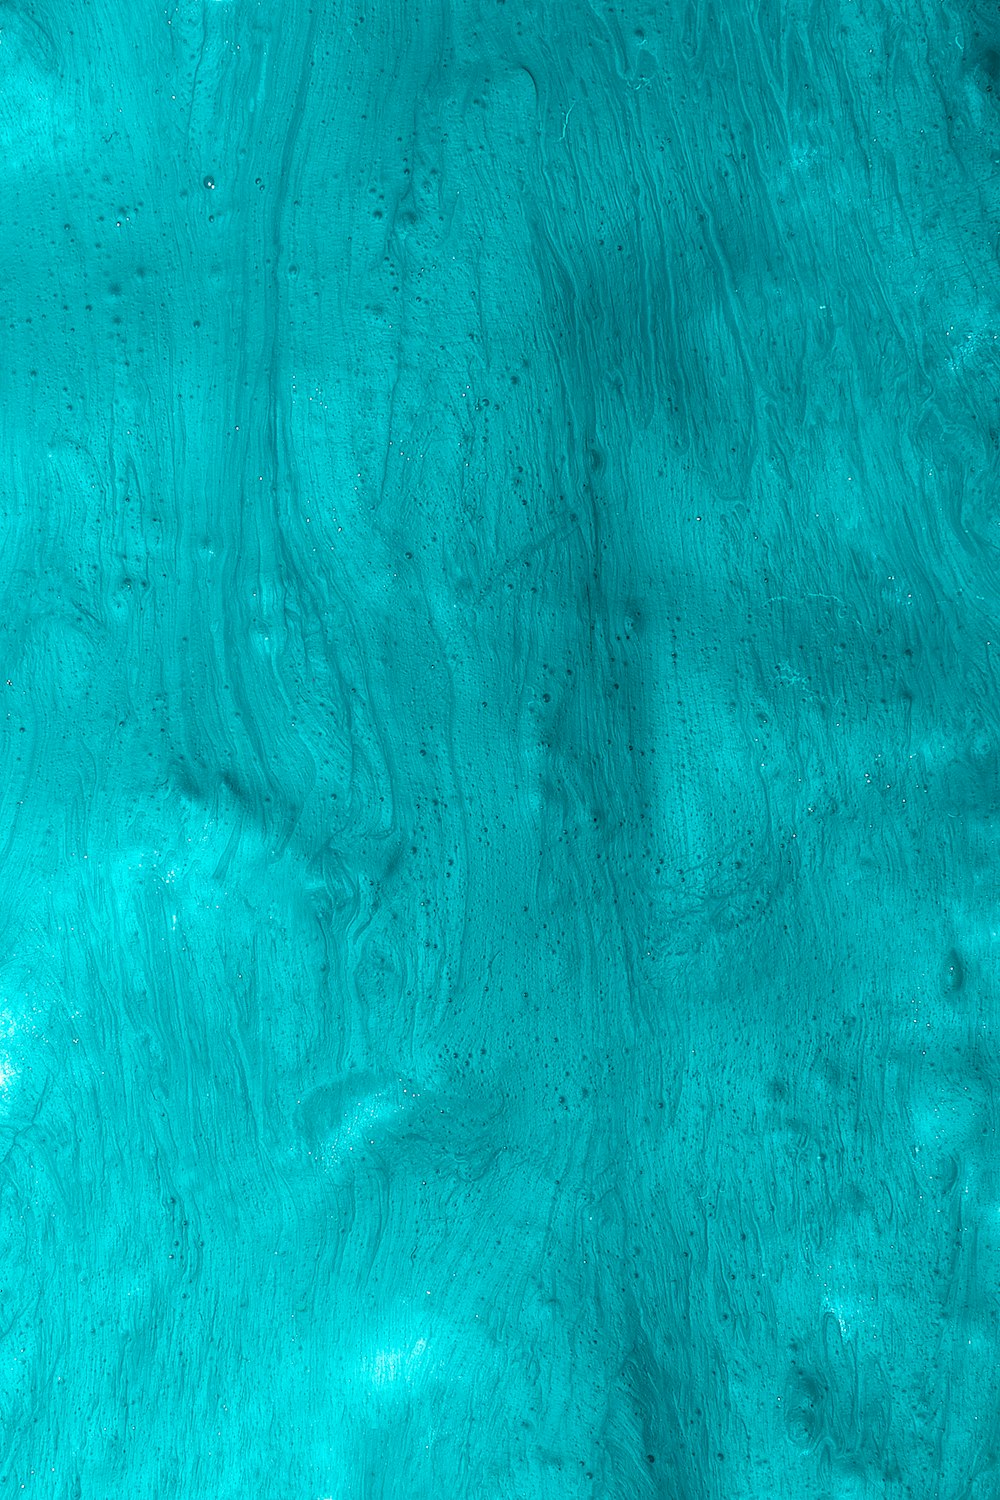 Turquoise Background Pictures | Download Free Images on Unsplash